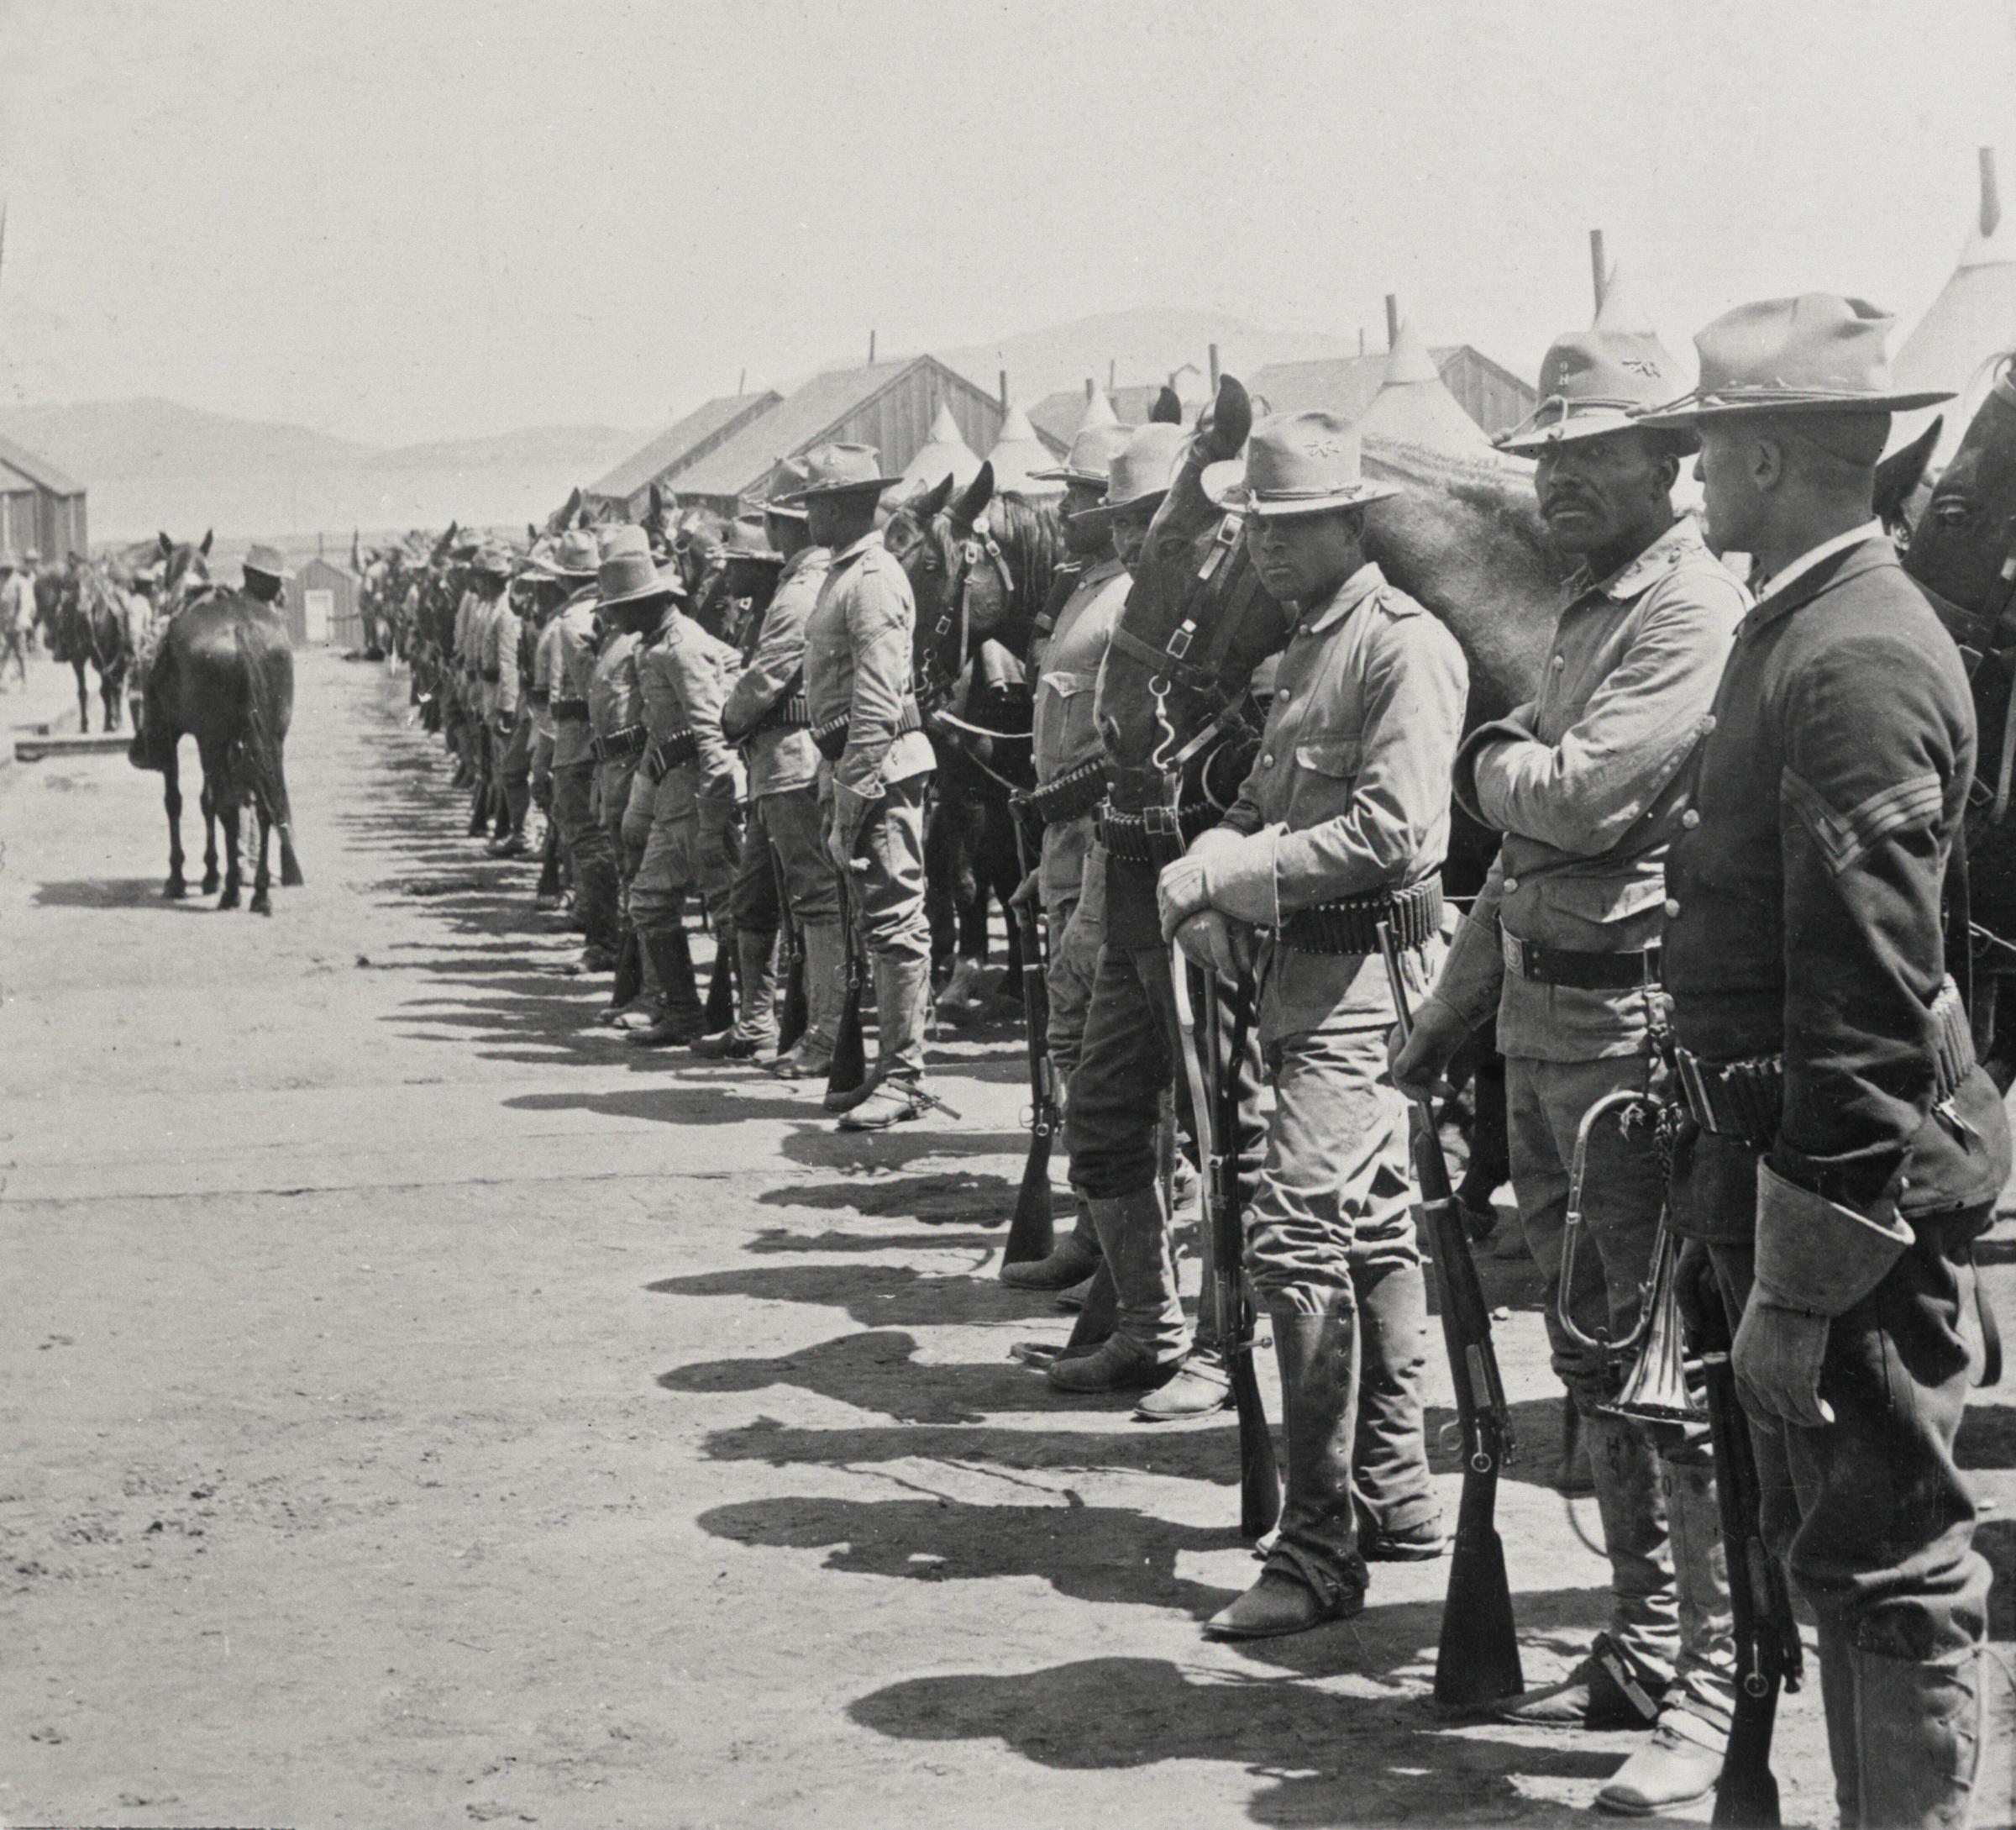 Company H, 9th Cavalry in camp at the Presidio in 1900. Image courtesy Library of Congress.